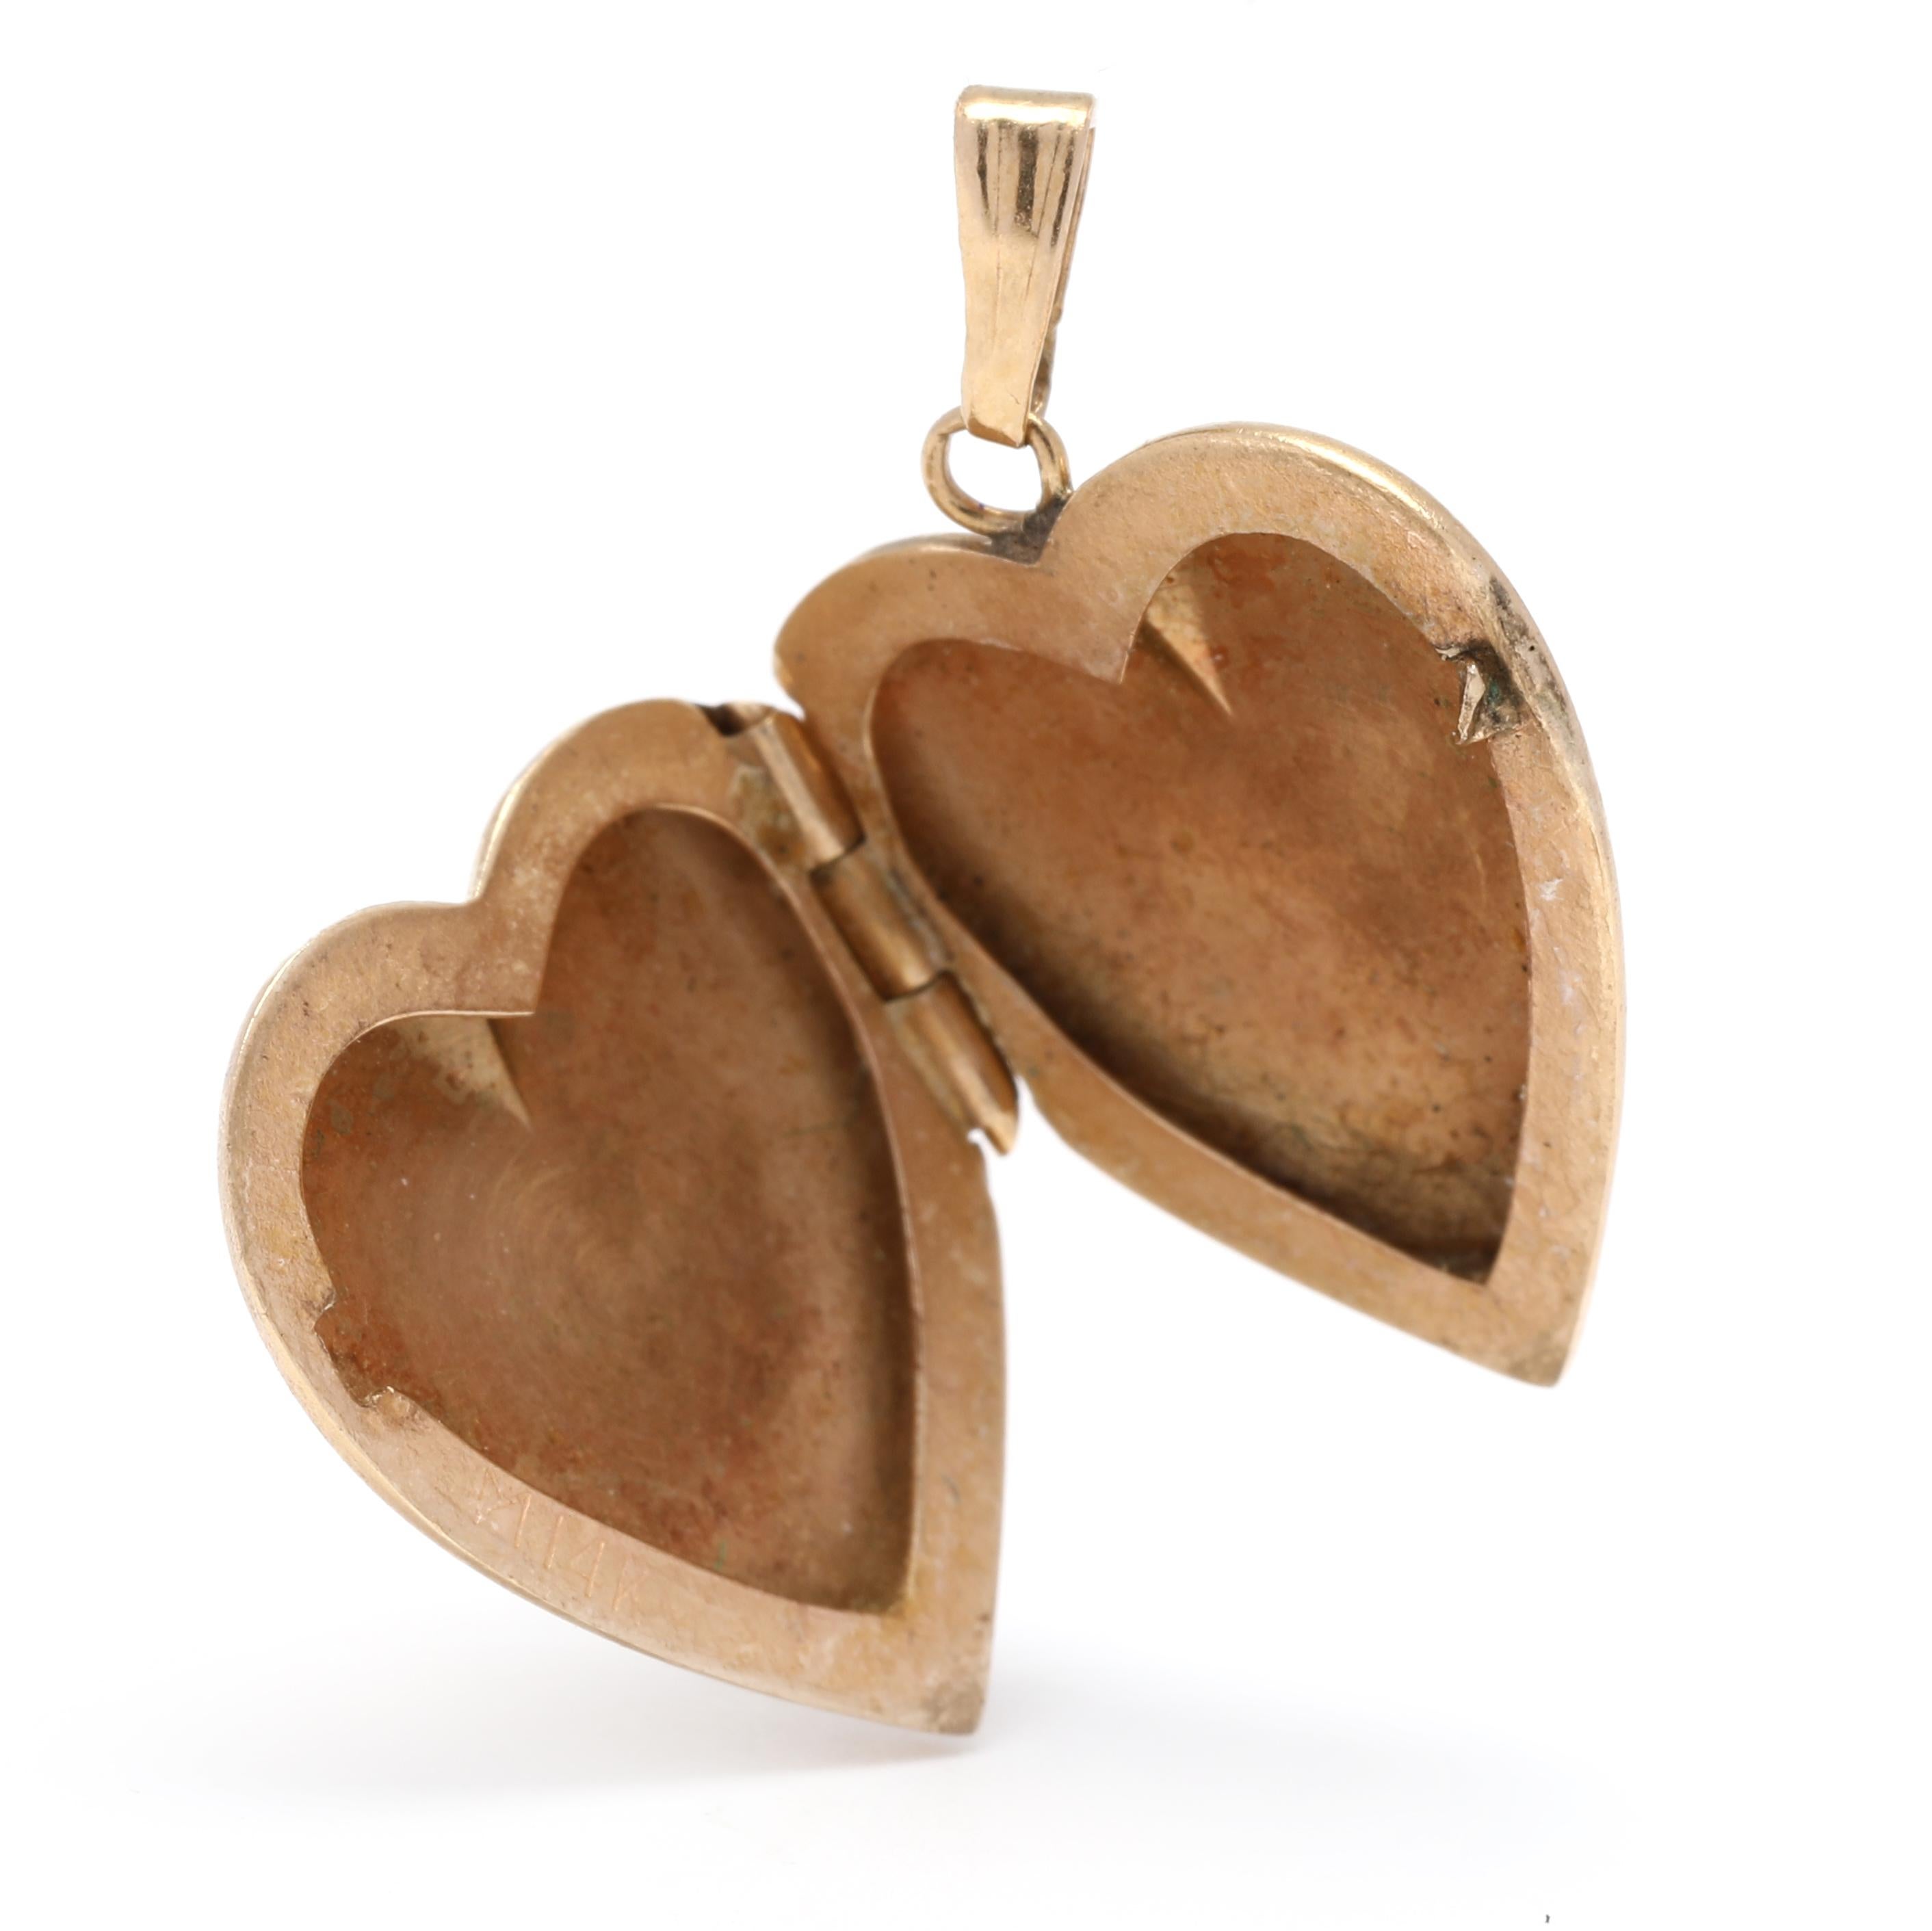 Small Gold Engraved Heart Locket Pendant, 14k Yellow Gold In Good Condition For Sale In McLeansville, NC